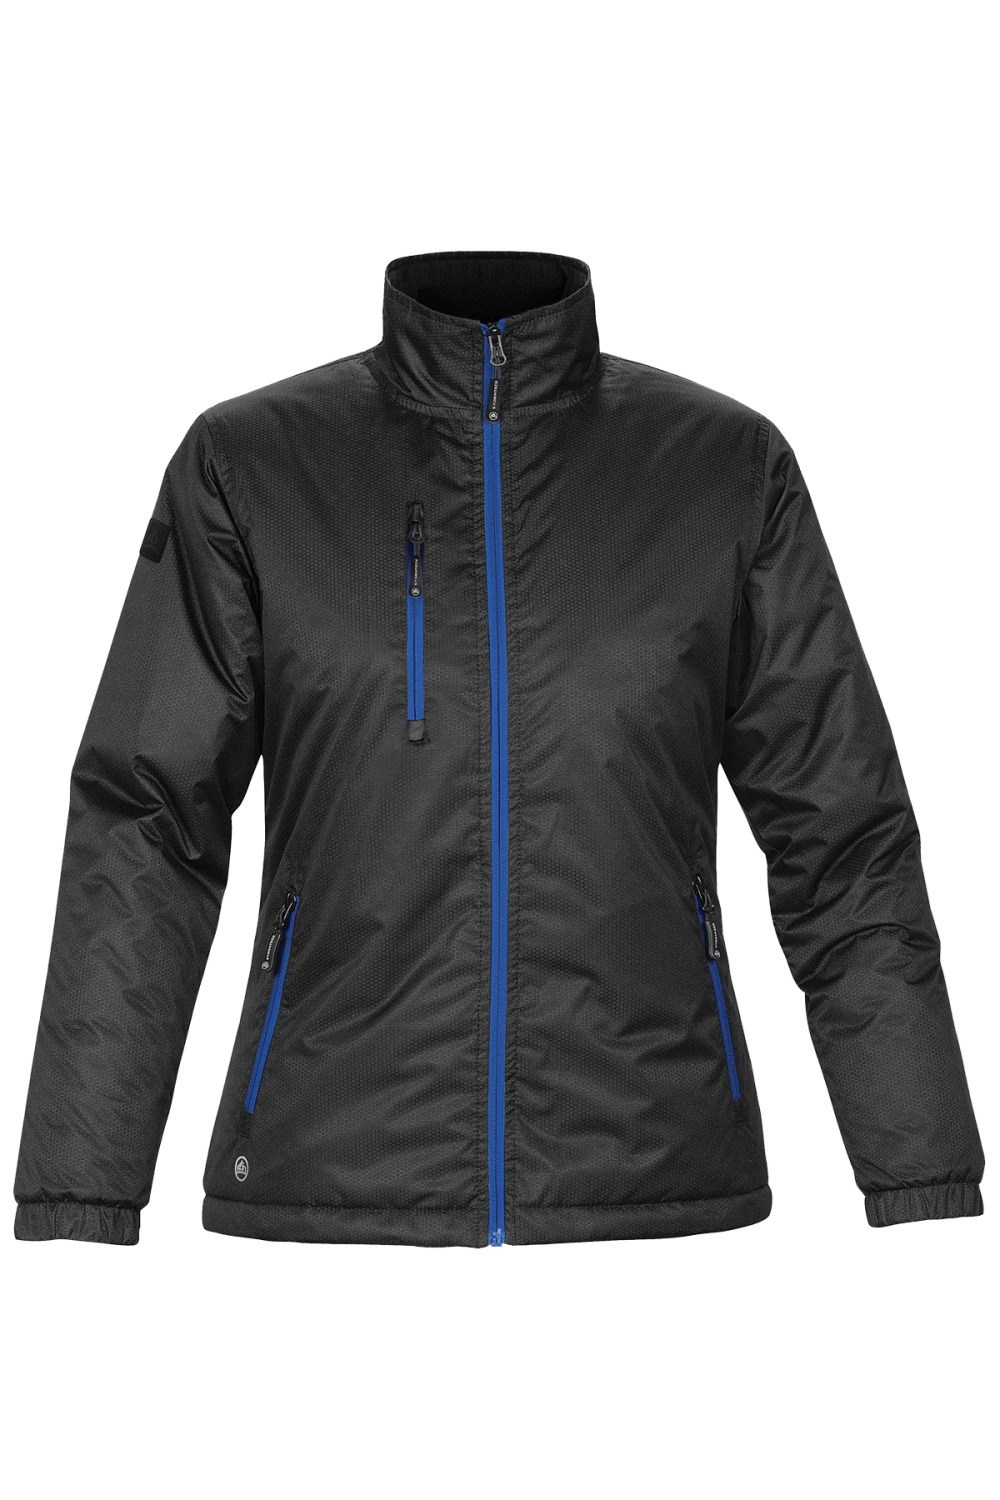 Axis Womens Water Resistant Jacket -